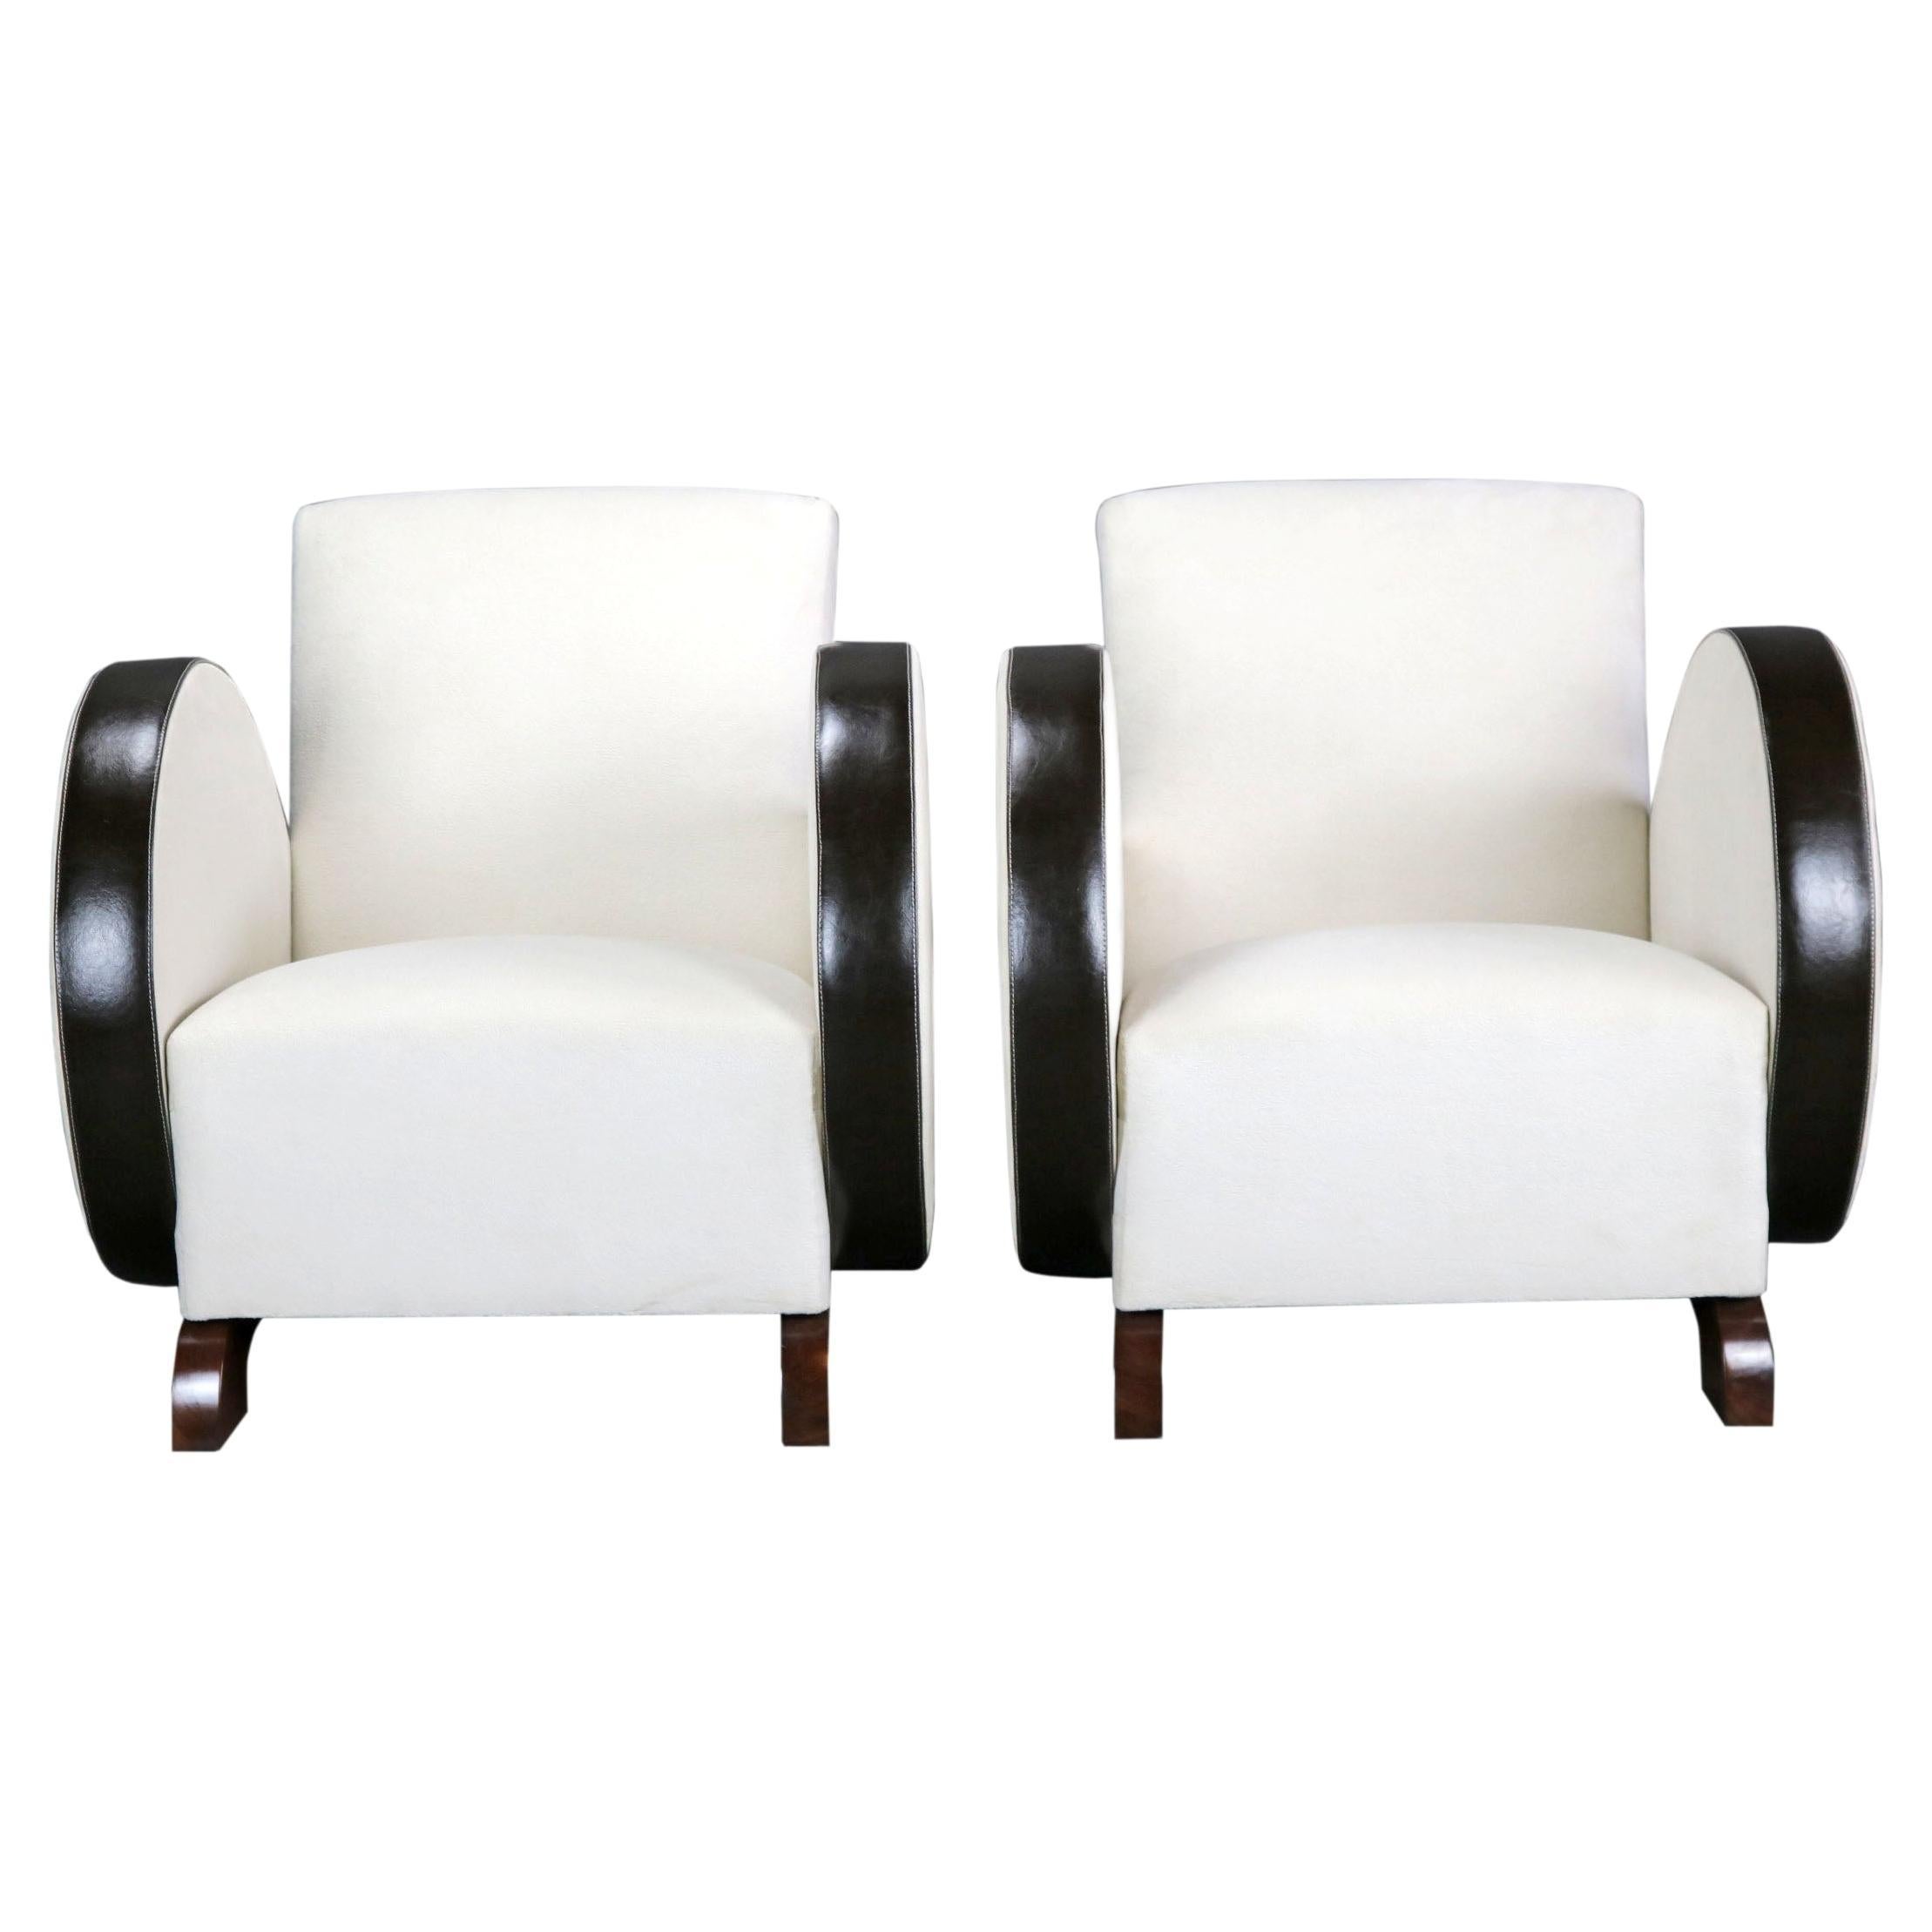 A pair of beautiful and stylish white Art Deco armchairs, with a streamlioned and dynamic design. The upholstery is from a comfortable and elegand fabric. The arms are covered with genuine natural leather - this provides a protection against wear.